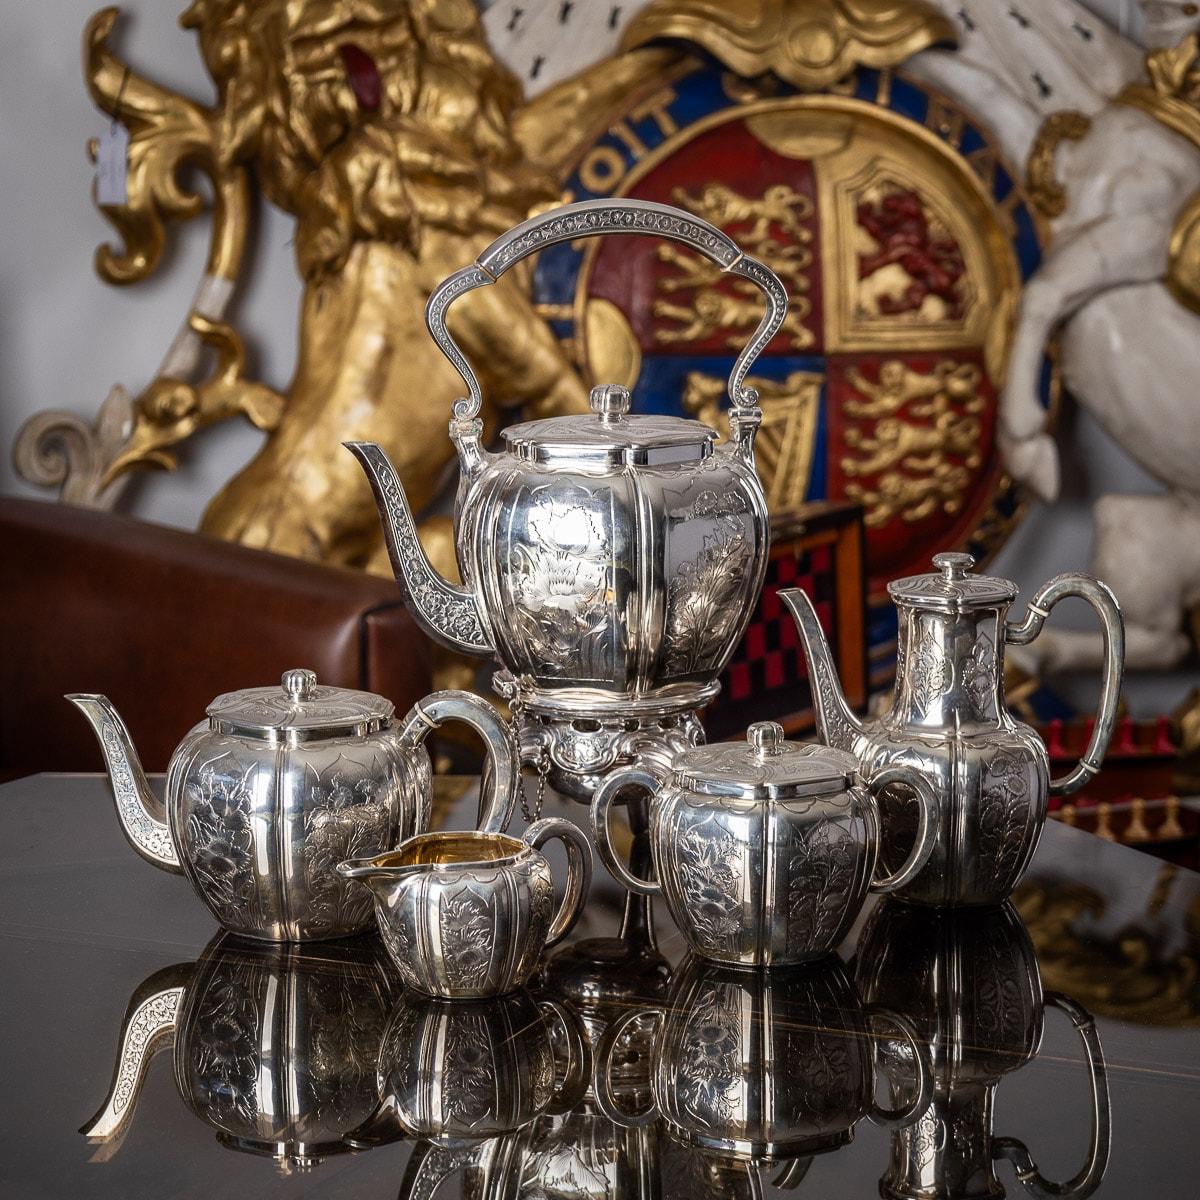 Antique late 19th century French exceptional tea service, comprising: a silver plated hot water kettle, silver teapot, silver coffee pot, silver sugar bowl and silver cream jug, melon shaped with panels chased with chrysanthemums and scrolls on a